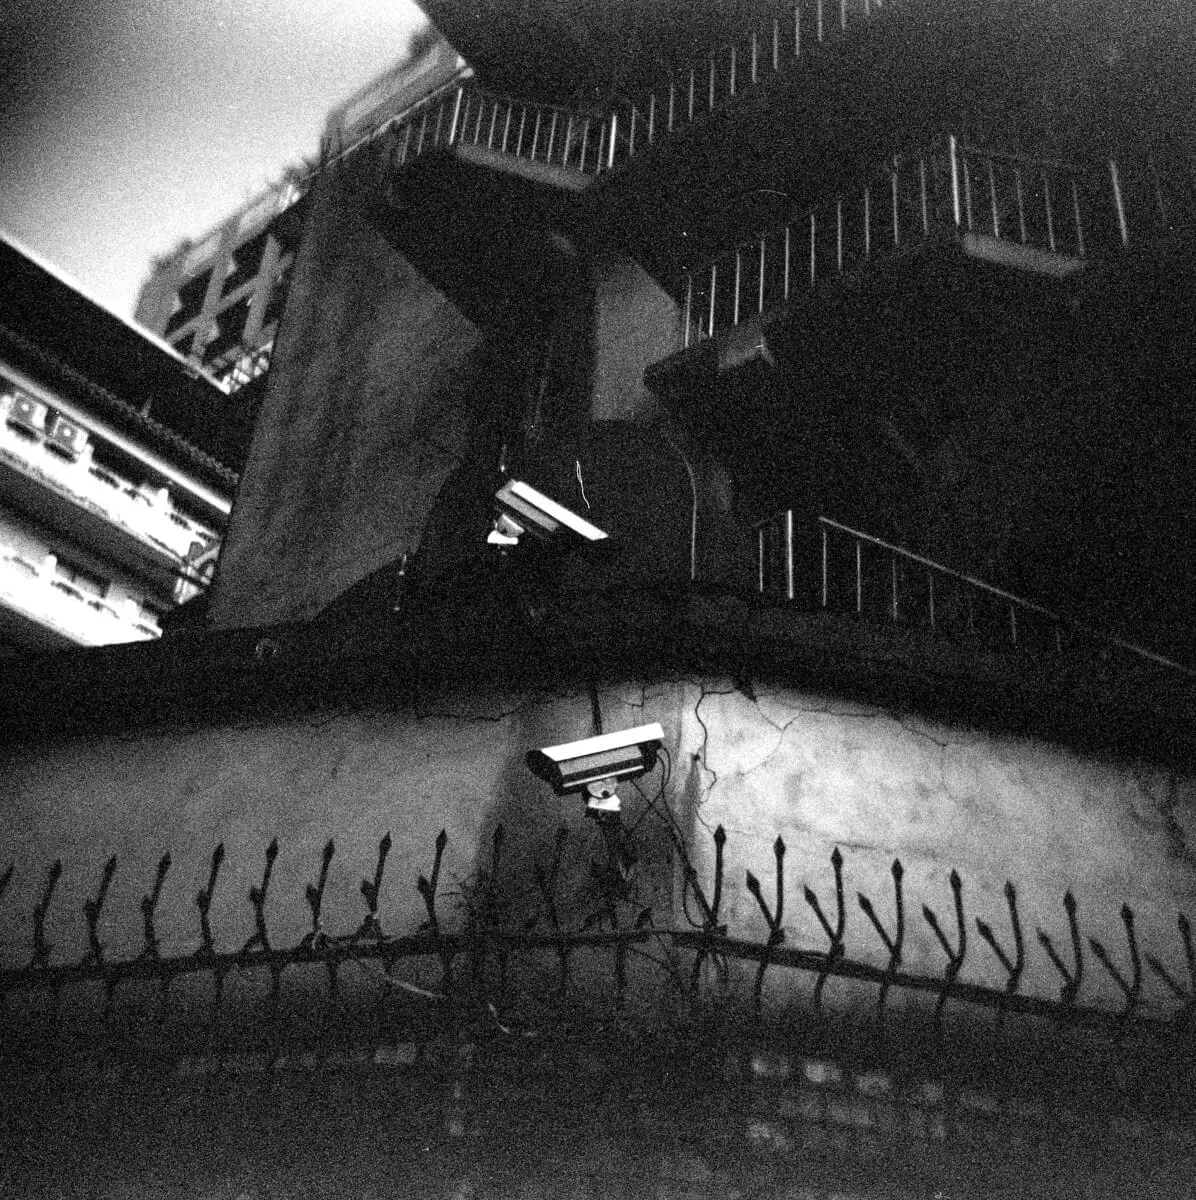 Got you covered - Shot on Kodak Tri-X 400 at EI 800 (120 Format). Black and white negative film in 120 format shot as 6x6. Holga 120GN + 60mm f/8 lens